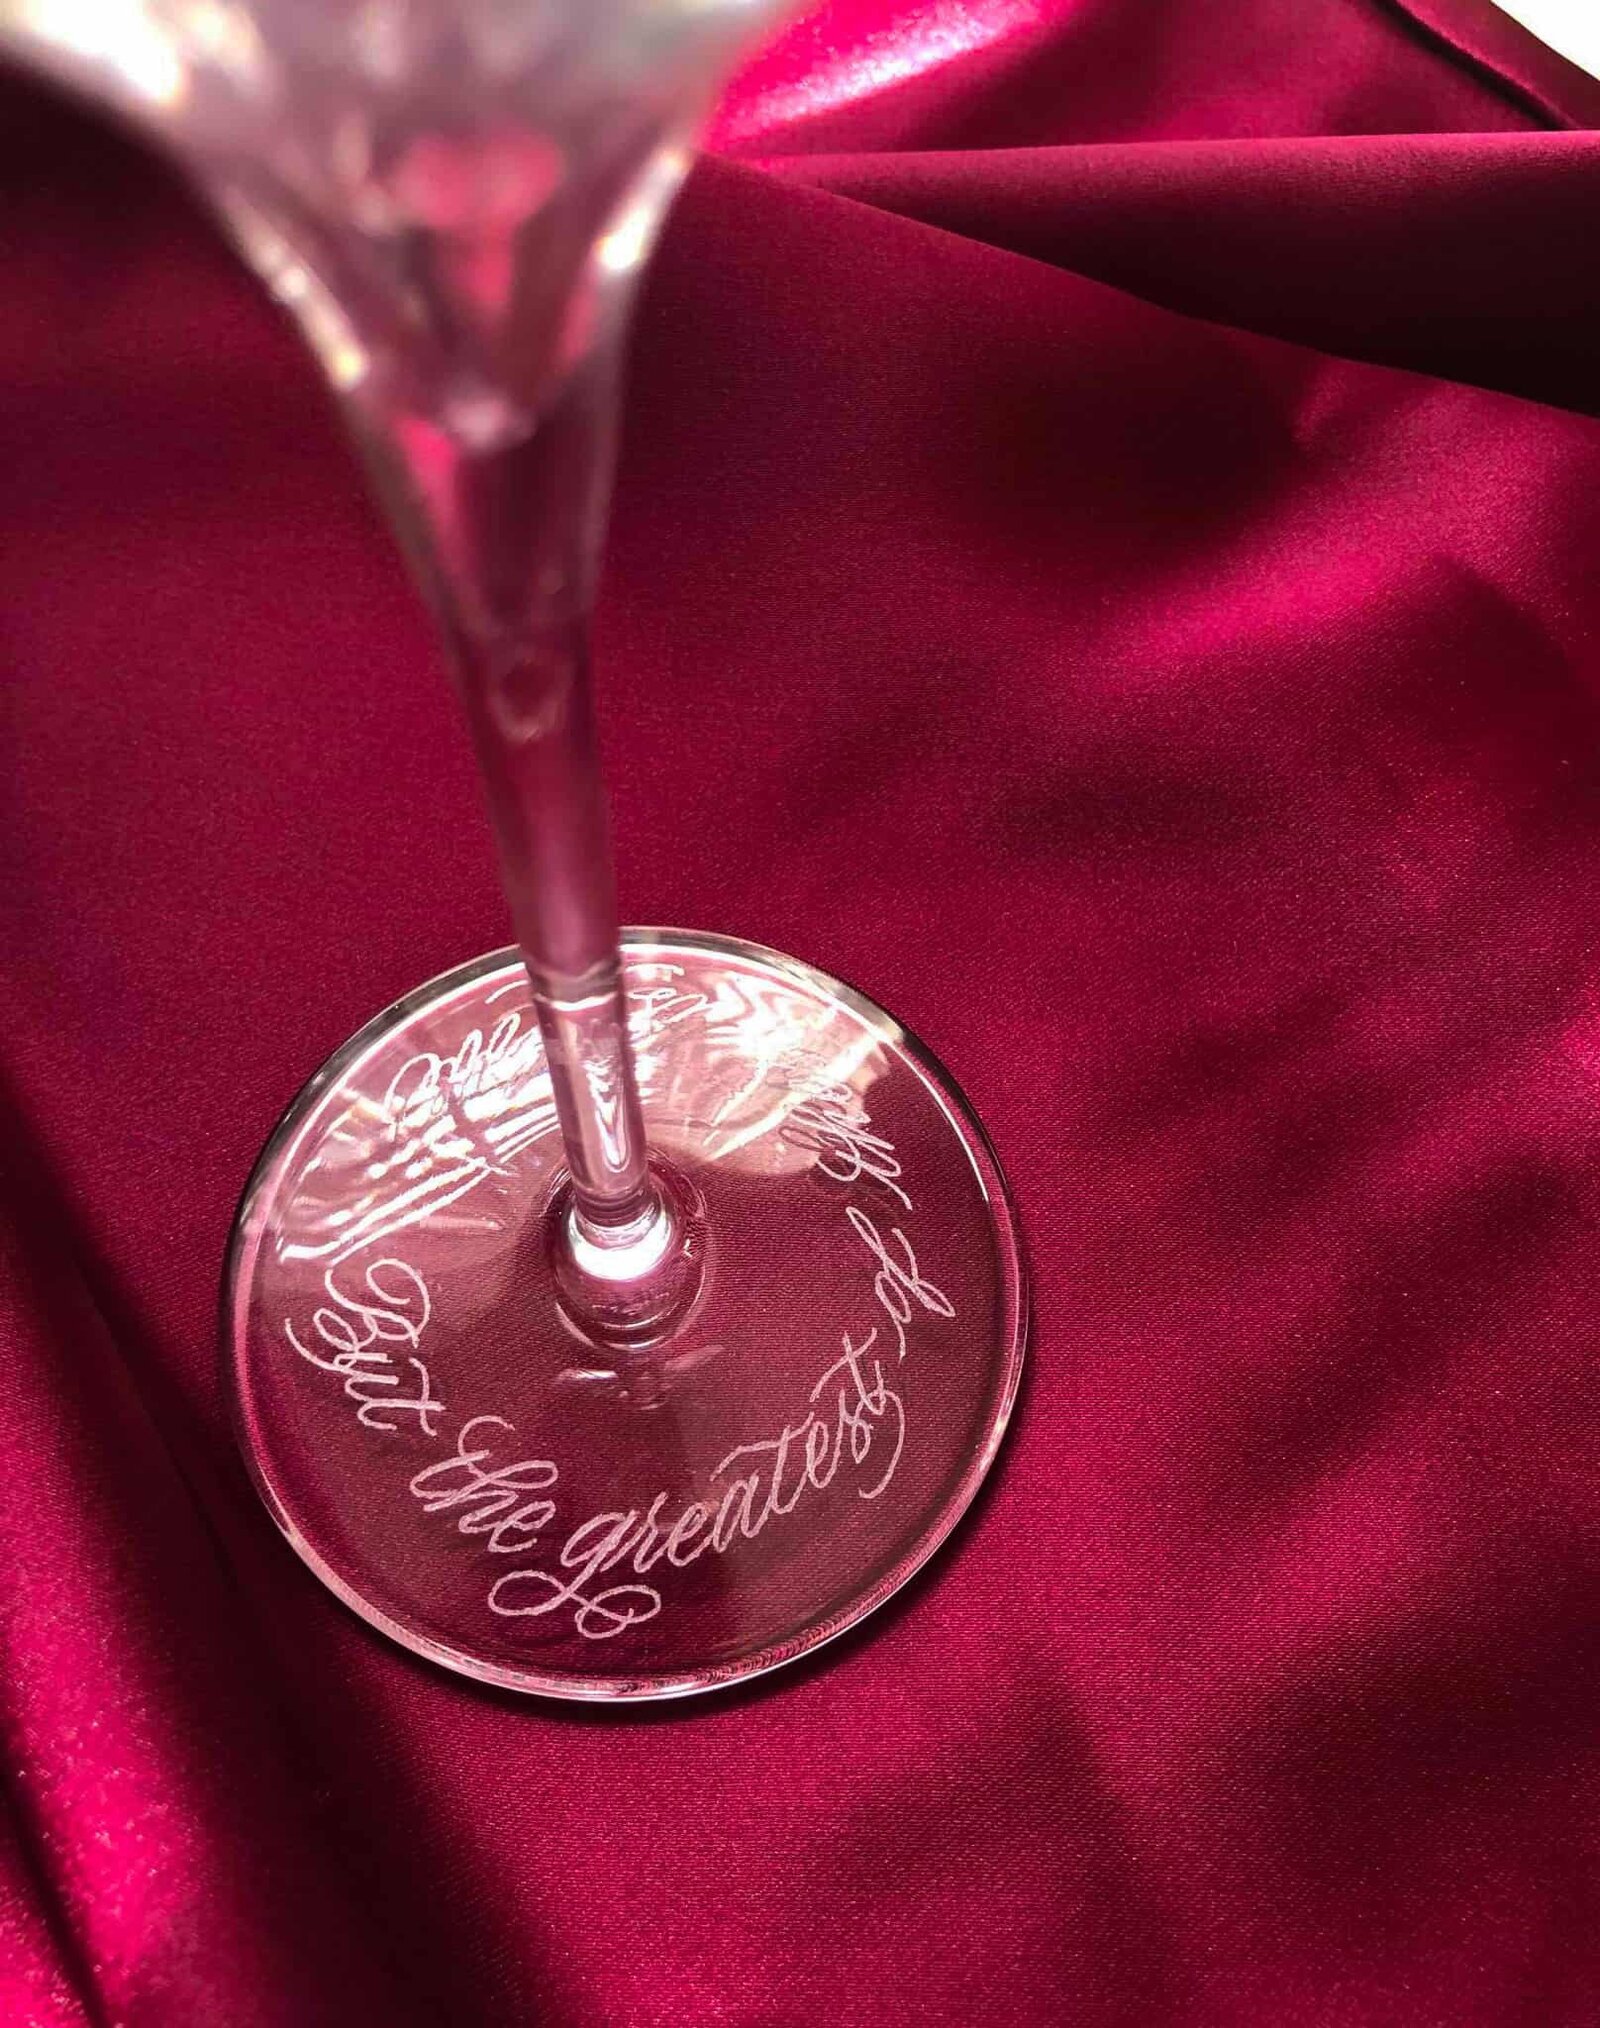 engraved champagne glass set against a red silk background